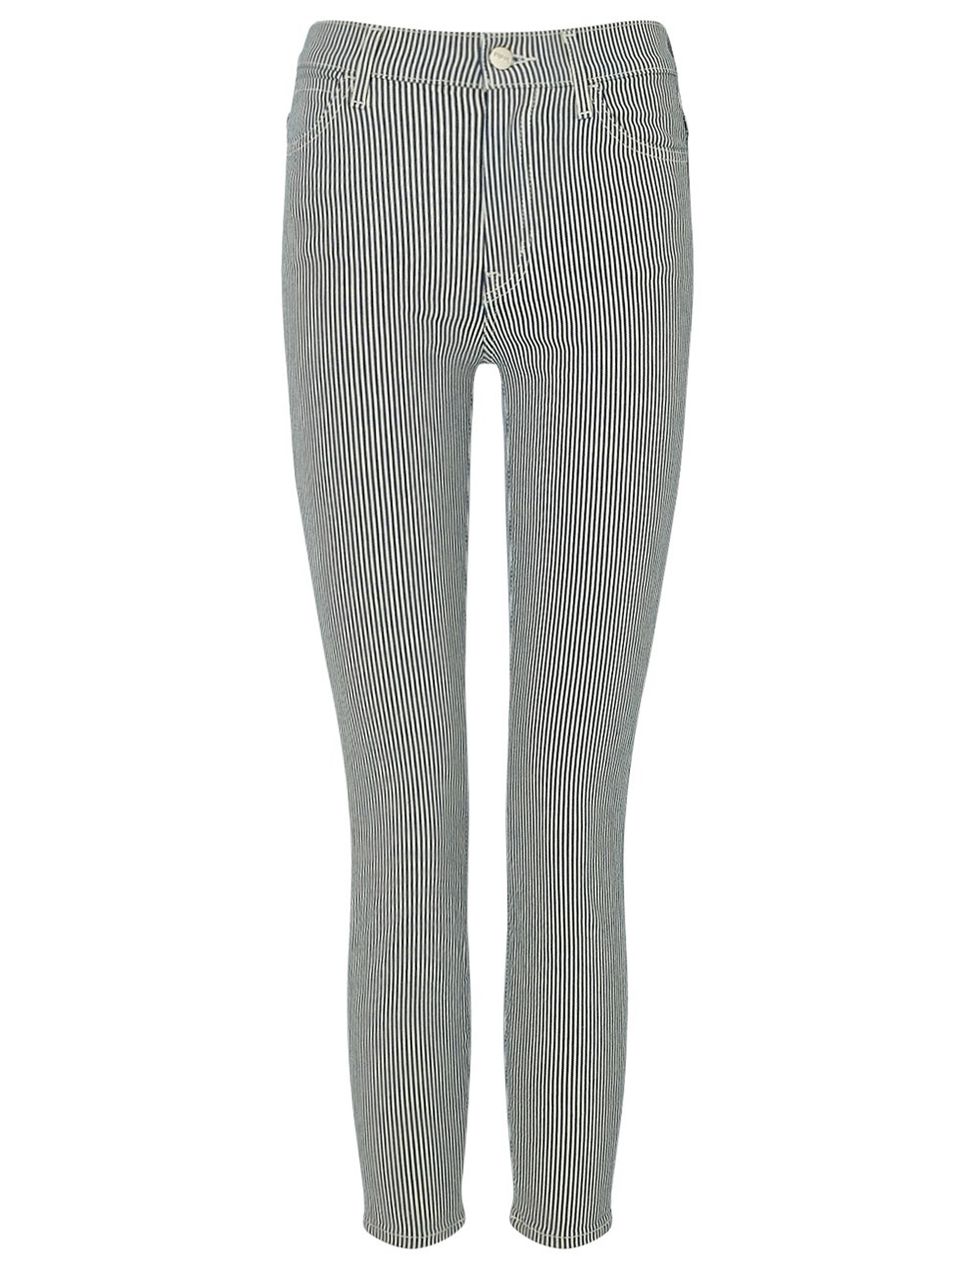 Style, Pattern, Grey, Tights, Symmetry, Active pants, Leggings, 